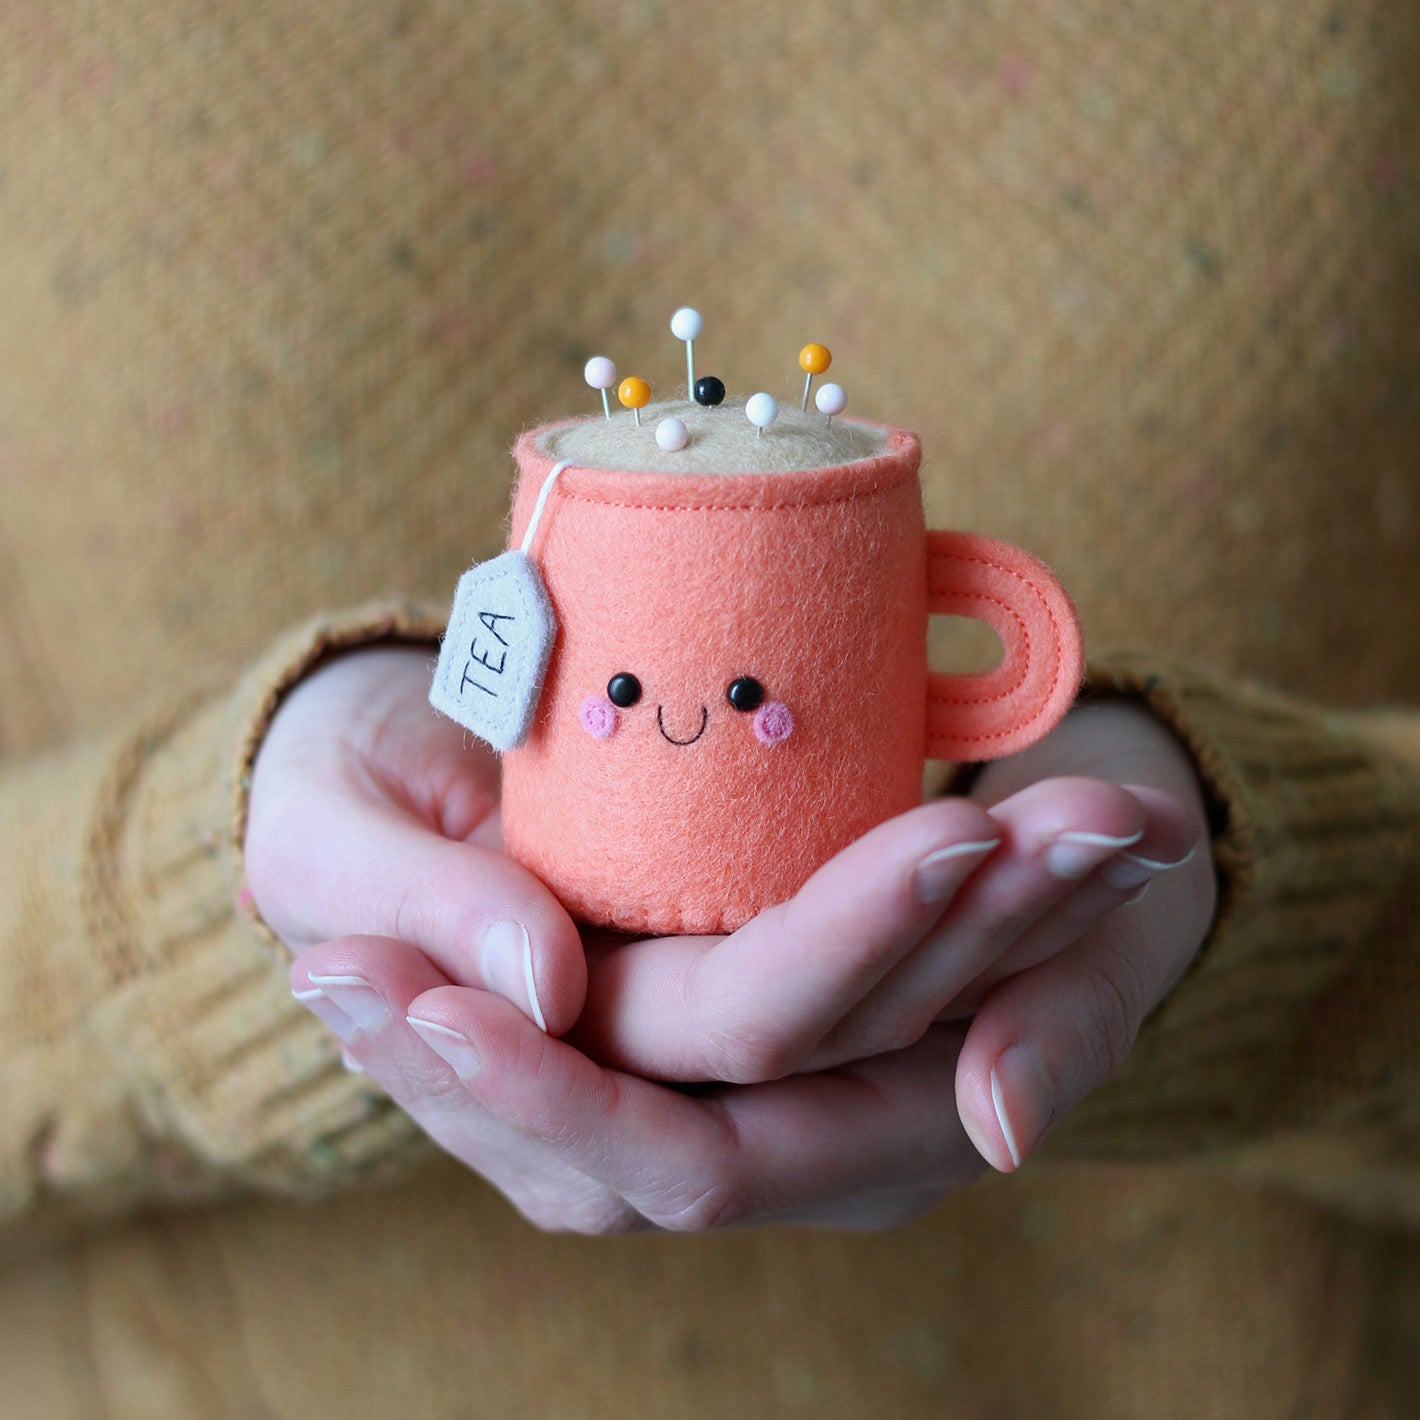 Hands holding cute coral shade teacup pincushion by hannahdoodle